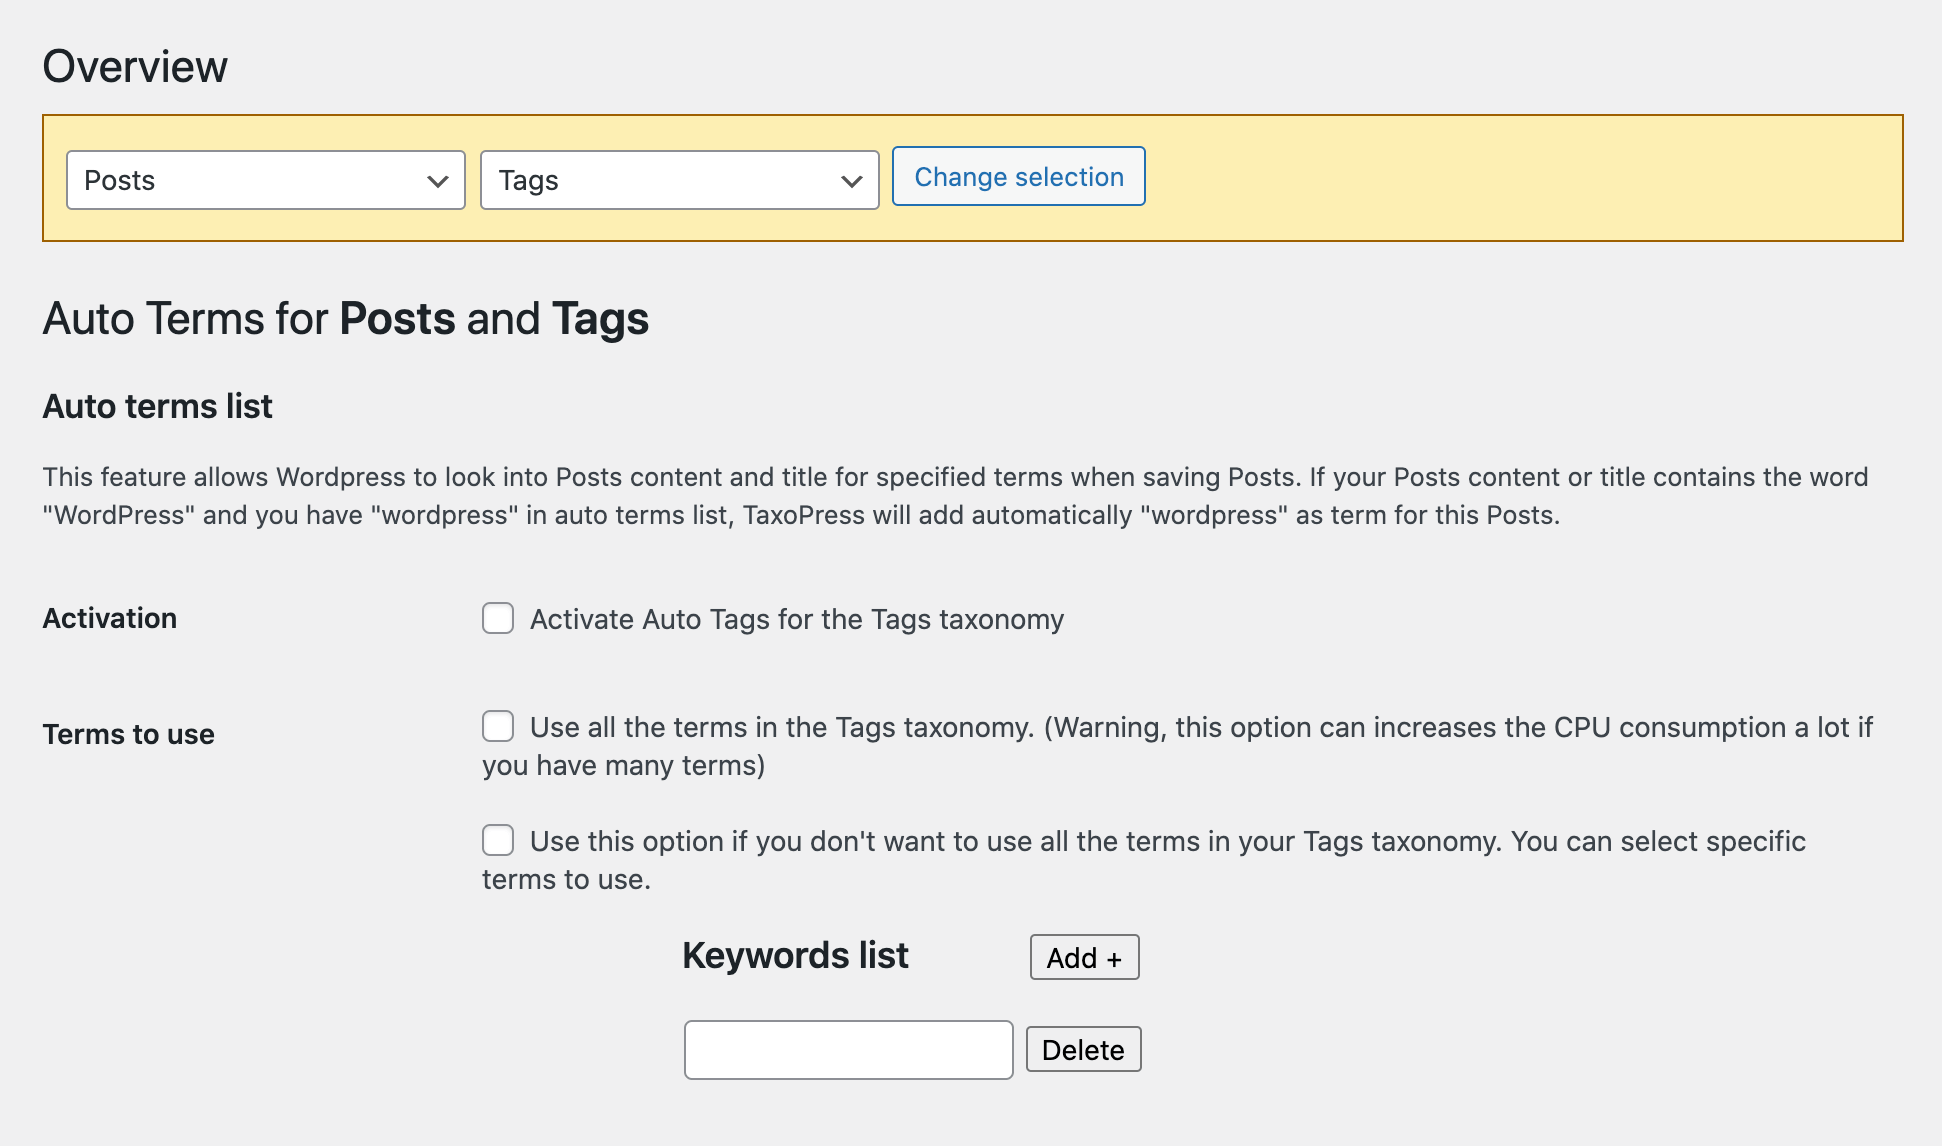 TaxoPress' auto terms feature.